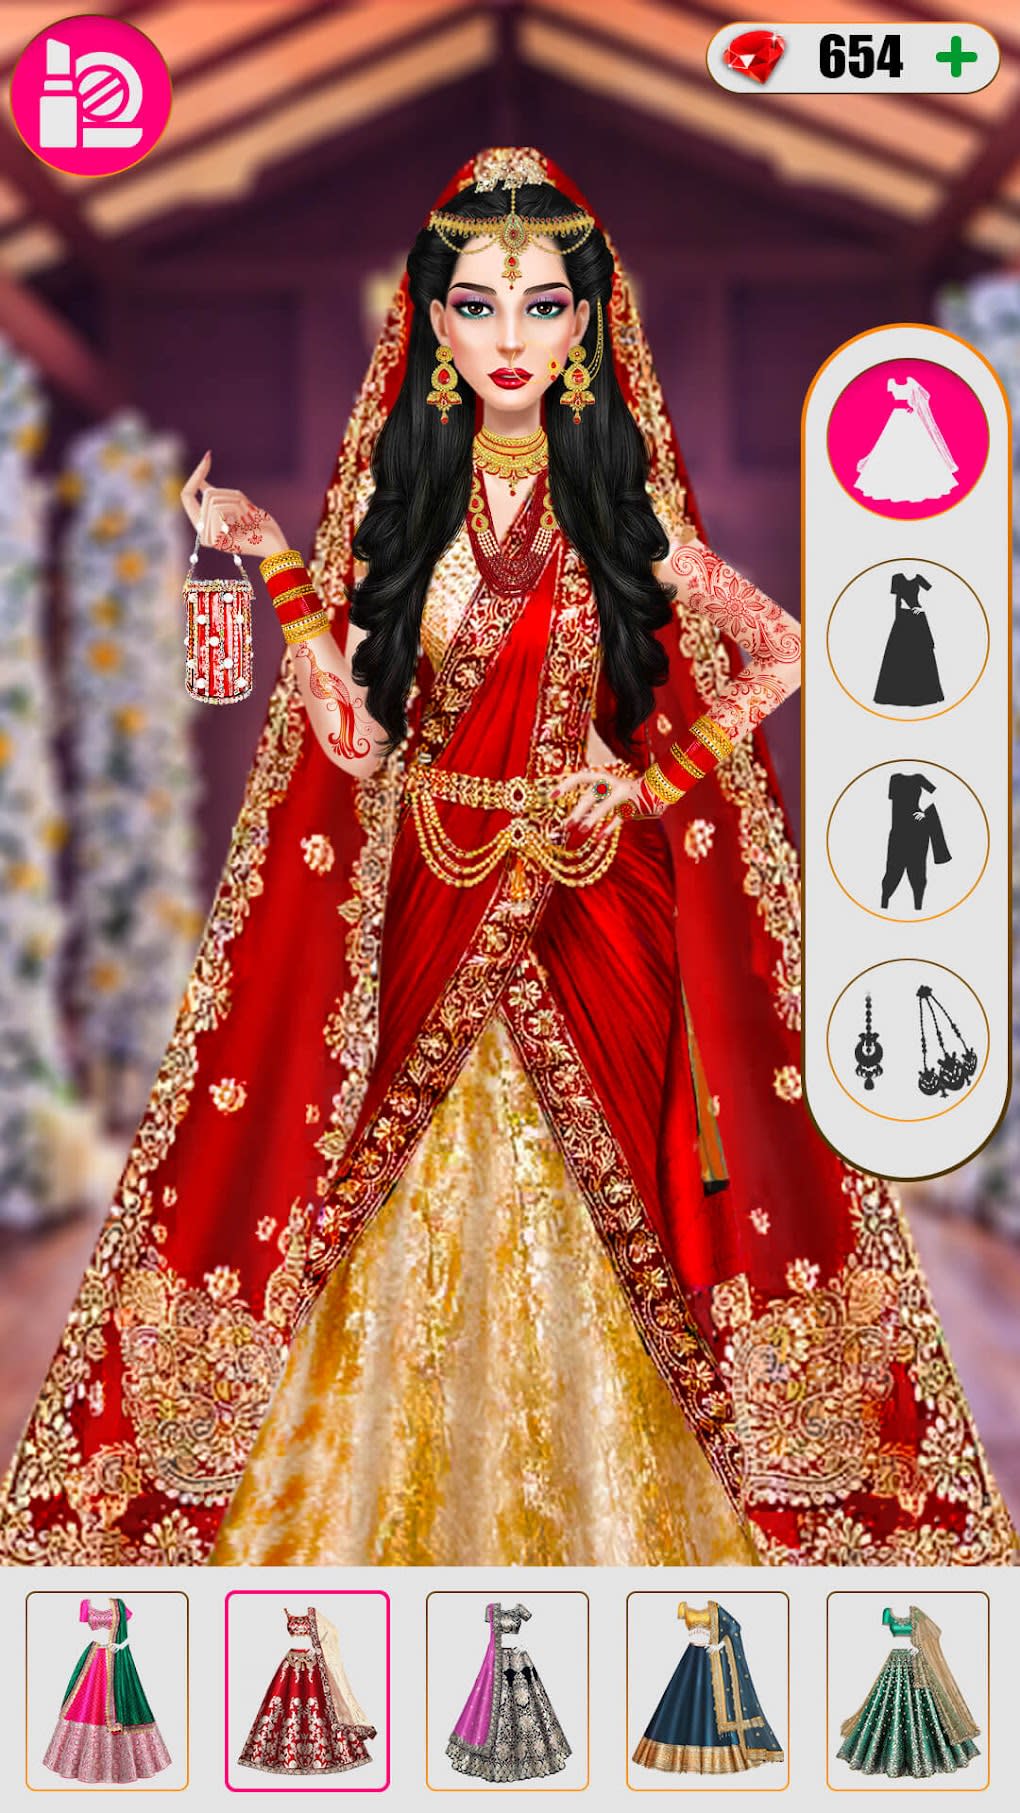 Indian Wedding Girl Arrange Marriage Game APK - Free download for Android